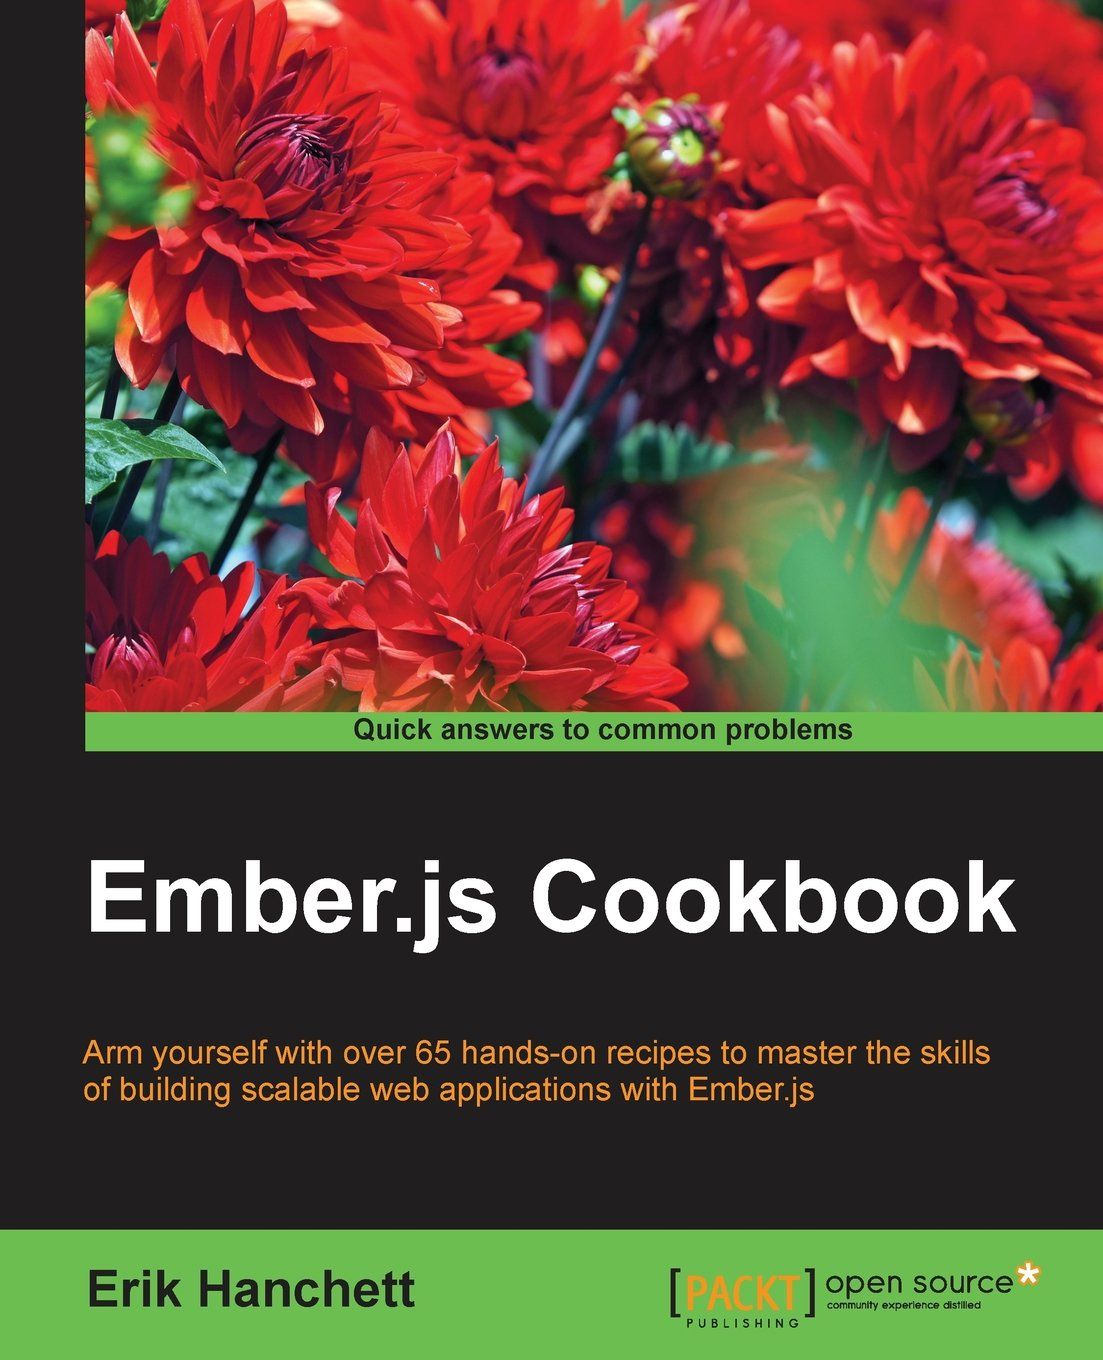 The Ember.js Cookbook Is Finally Out!